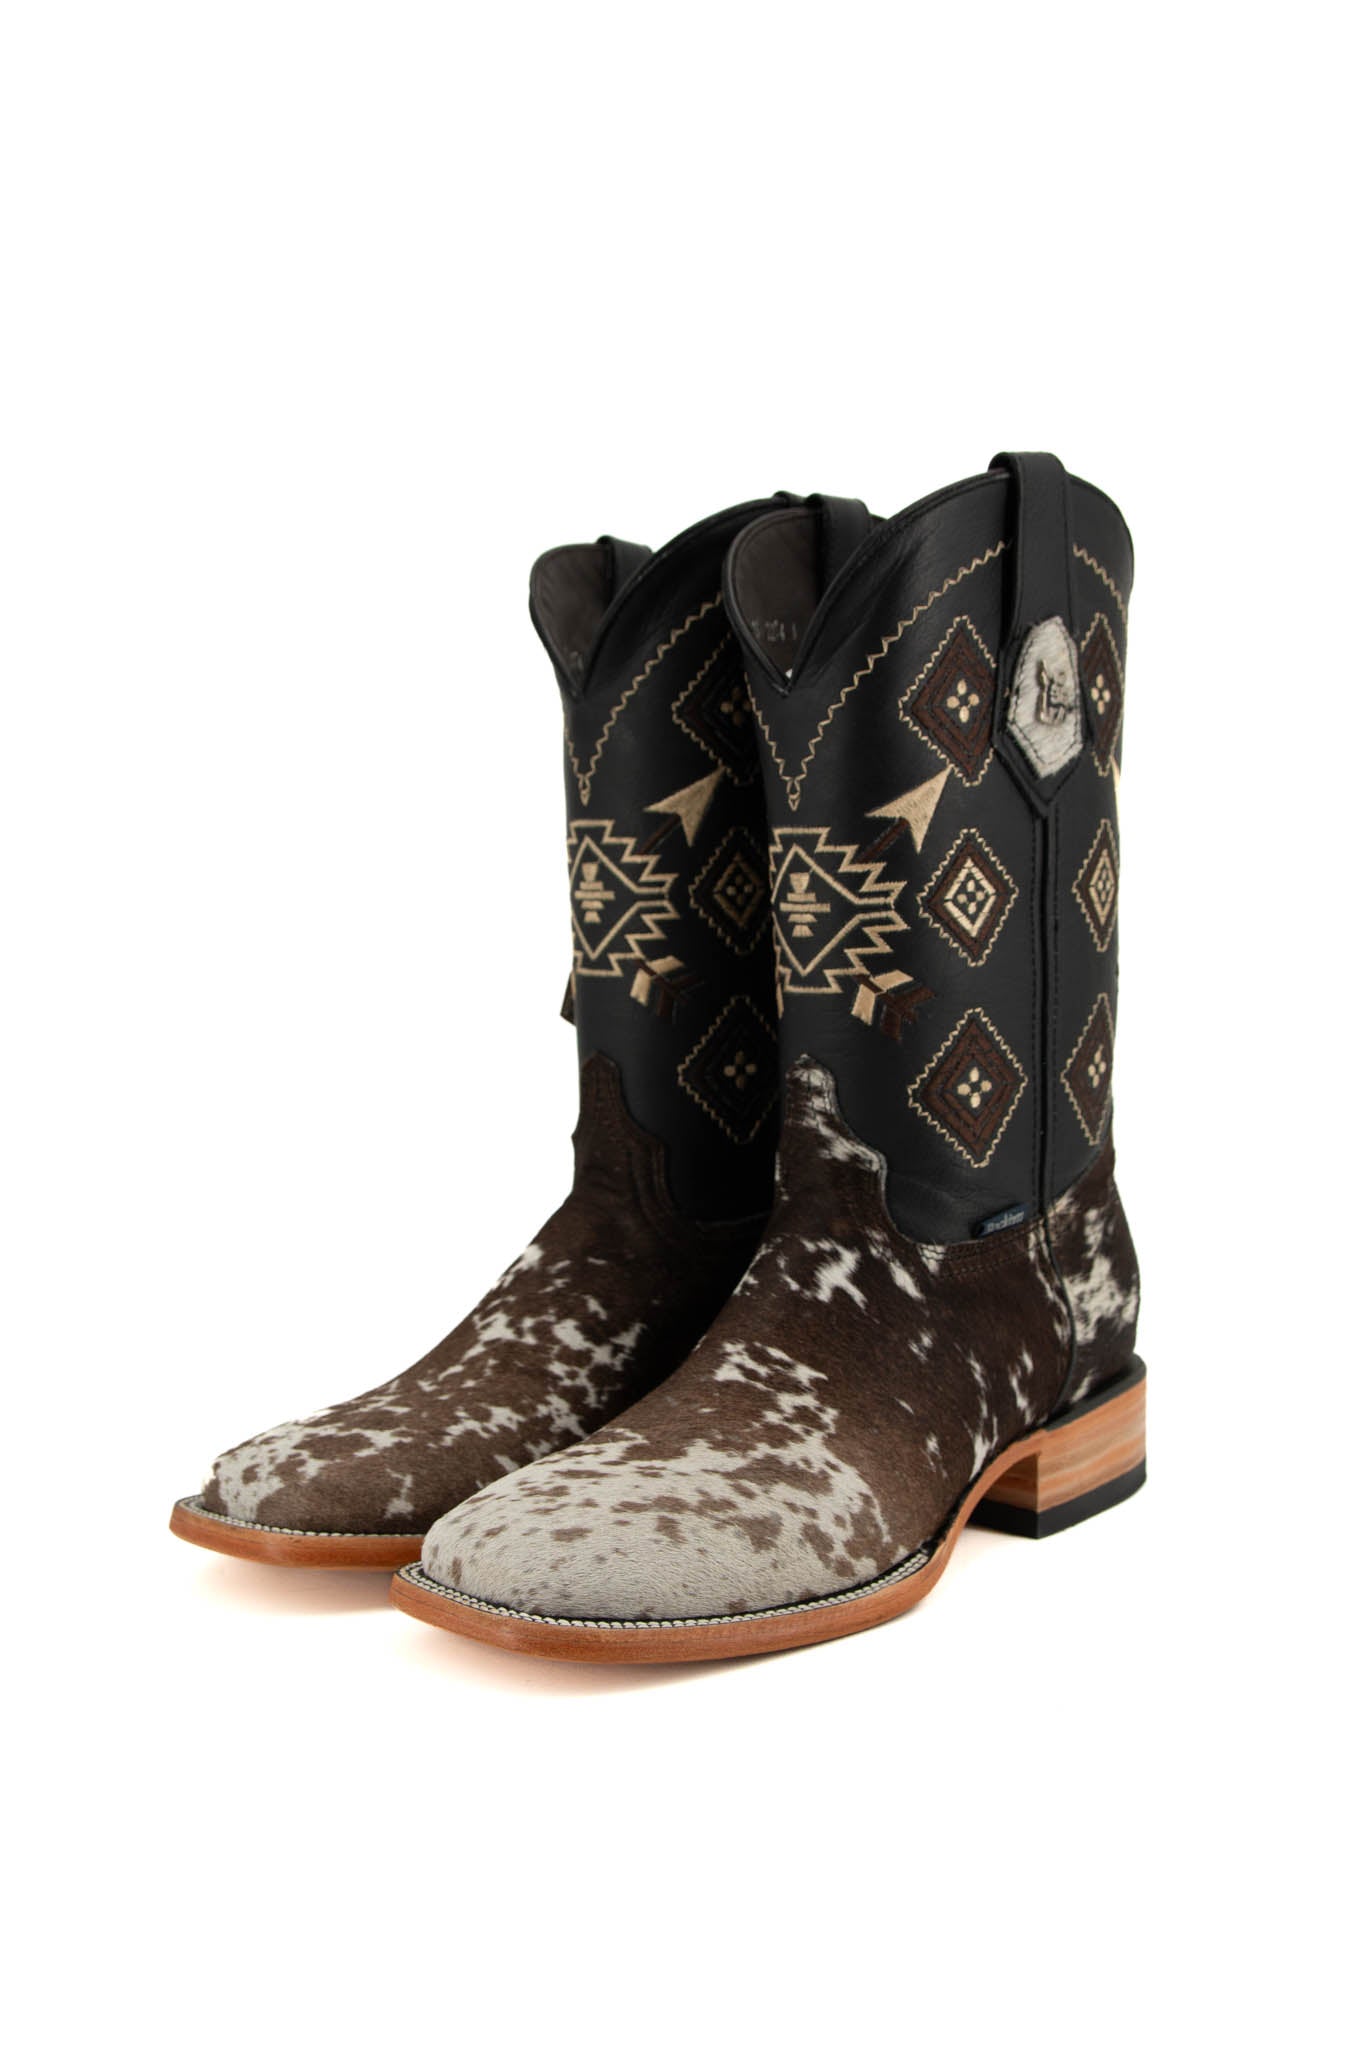 Men's Cowhide Boots Size 7 Box 4F (As Seen On Image)